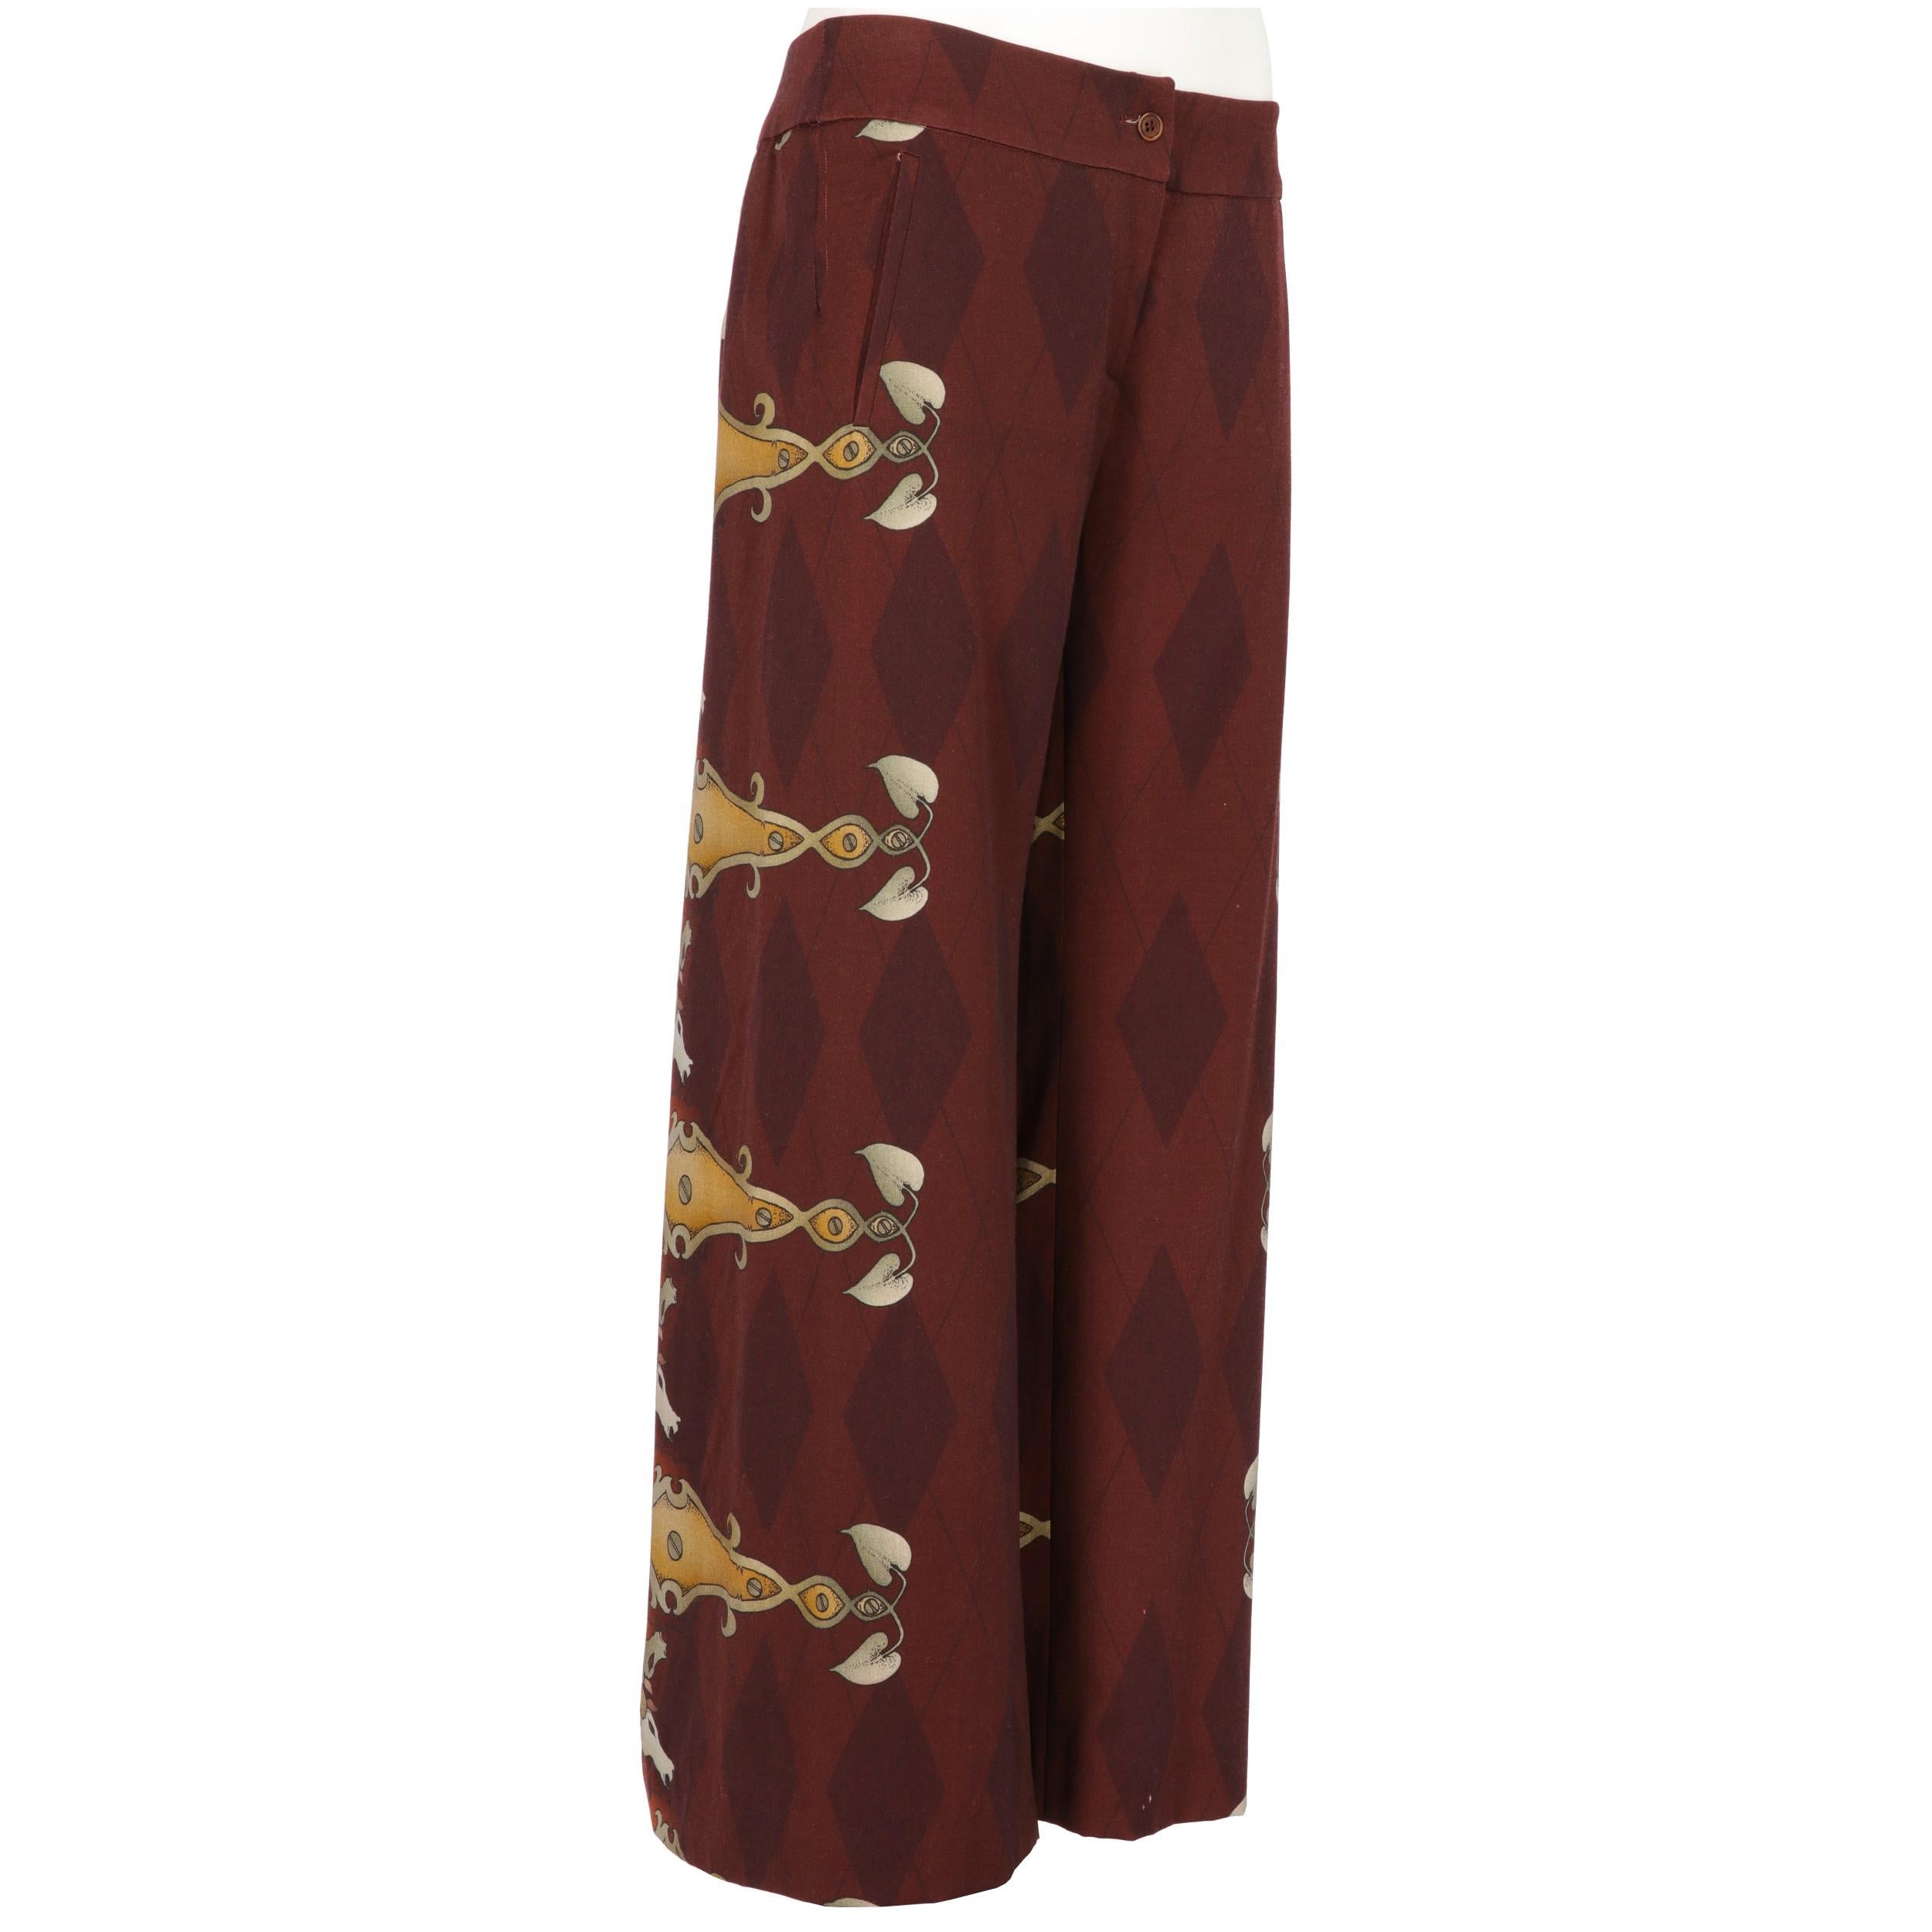 Basso & Brooke burgundy long palazzo trousers, with inverted pleat detail in the center of the back, printed with horses in shades of brown, front closure with button and zip, two fake side welt pockets.

Years: 2000s

Made in Italy

Size: 40